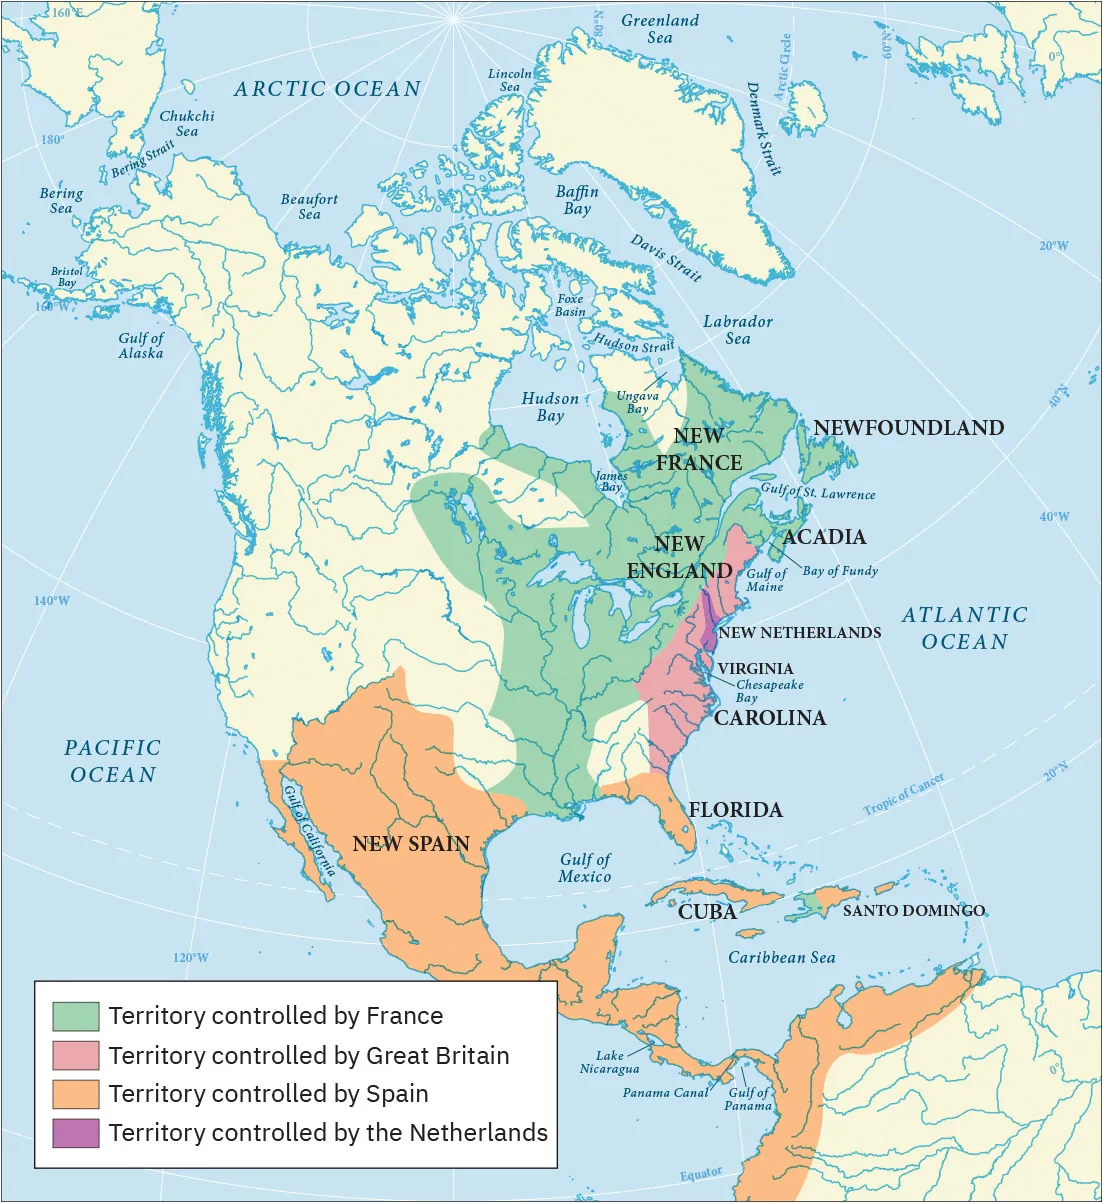 A map of North America, the Arctic Ocean, and the northwest portion of South America is shown, along with the Pacific and Atlantic Oceans. An area along the Atlantic coast of the U.S. from the Gulf of Maine, down through Virginia by the Chesapeake Bay and into land labeled “Carolina” is highlighted pink as Territory controlled by Great Britain. Splitting the pink area is a very small sliver south of the Gulf of Maine labeled “New Netherlands” and highlighted purple as Territory controlled by the Netherlands. West of the pink and purple areas, is a large portion of North America highlighted green from the Labrador Sea in Canada, including Newfoundland, Acadia, New France, and New England. It runs south to the Gulf of Mexico, and west to the middle of the U.S. and is labeled Territory controlled by France. This territory also includes the western half of Santo Domingo. All of Central America stretching up into a portion of the U.S., labeled new Spain, along with Florida, Cuba, and the eastern portion of the island of Santo Domingo in the Caribbean Sea is highlighted orange as Territory controlled by Spain.